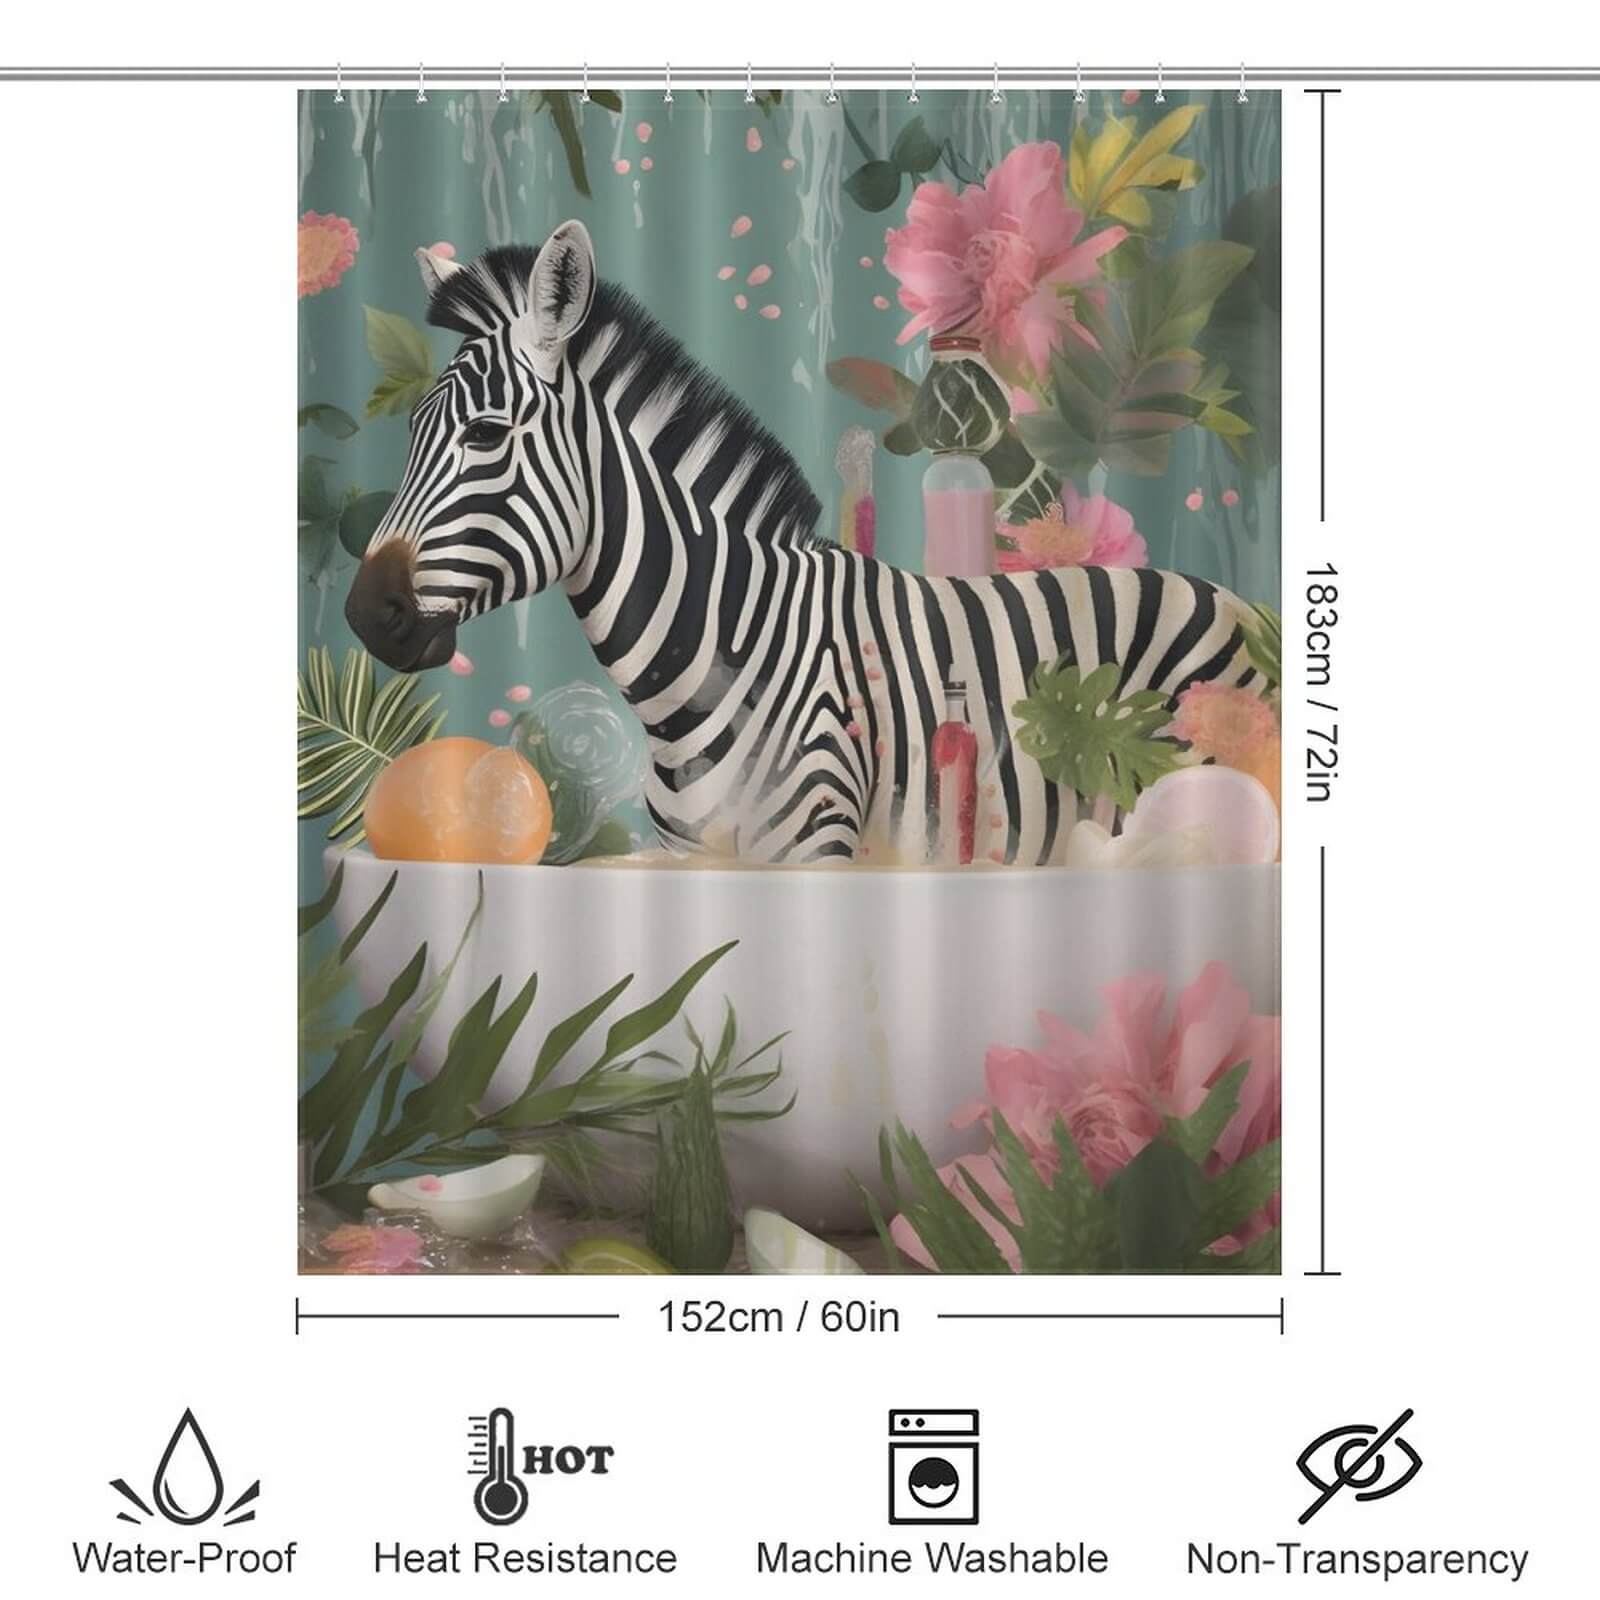 A Zebra In Bathtub Shower Curtain by Cotton Cat, with zebra and safari themes.